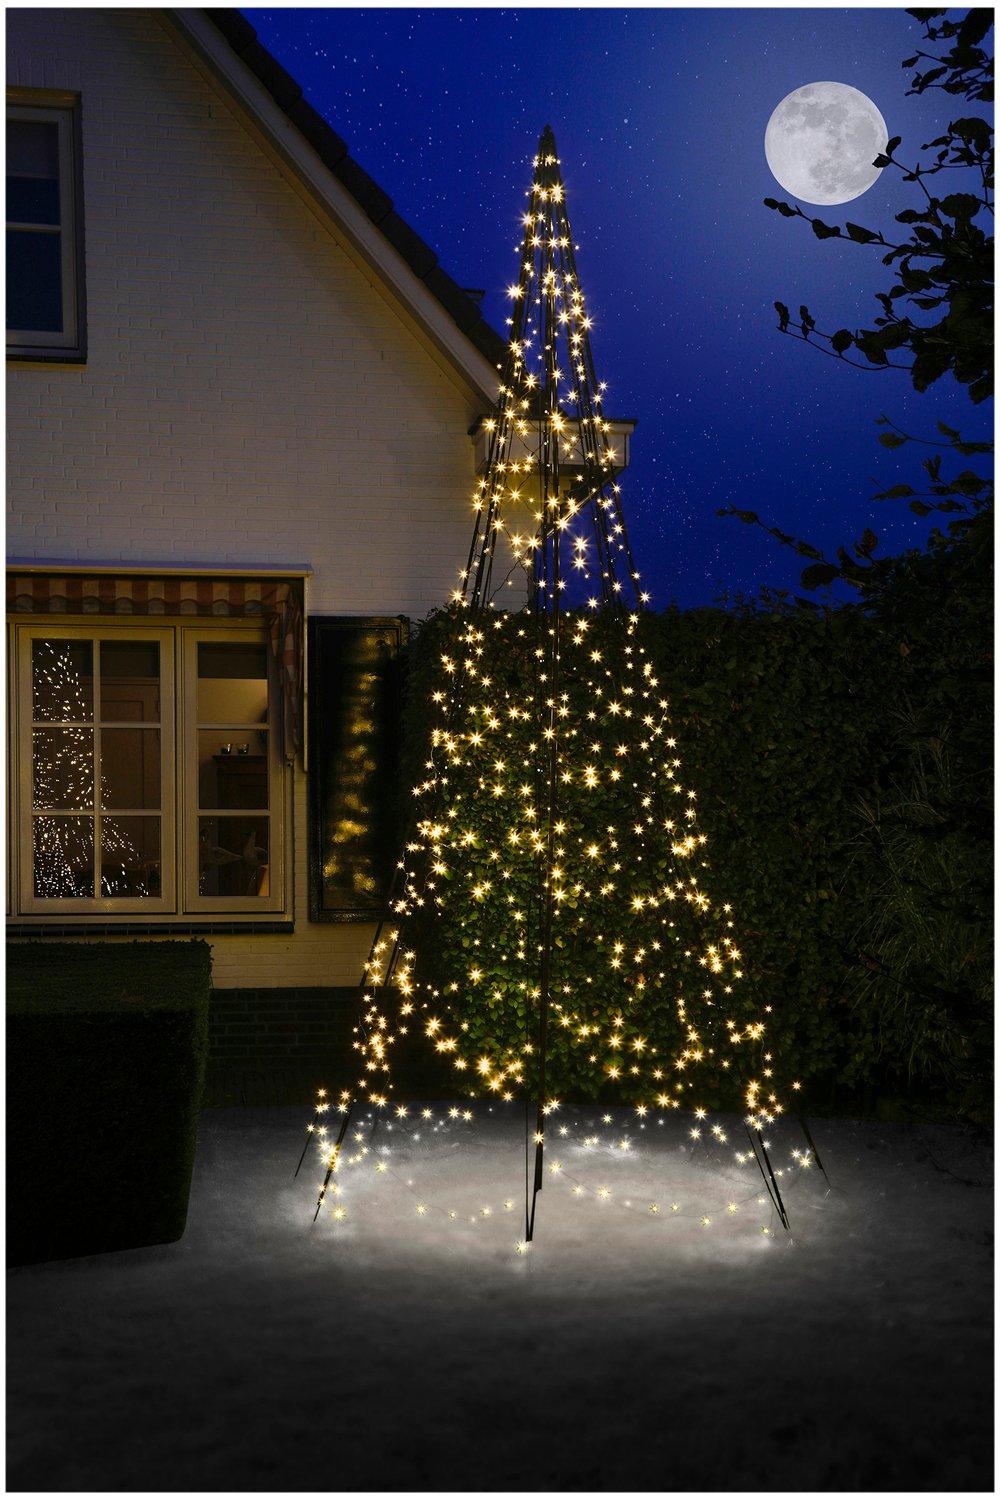 Outdoor Christmas Tree with Twinkling Lights - 4M 640 LED lights create a beautifully illuminated Ch